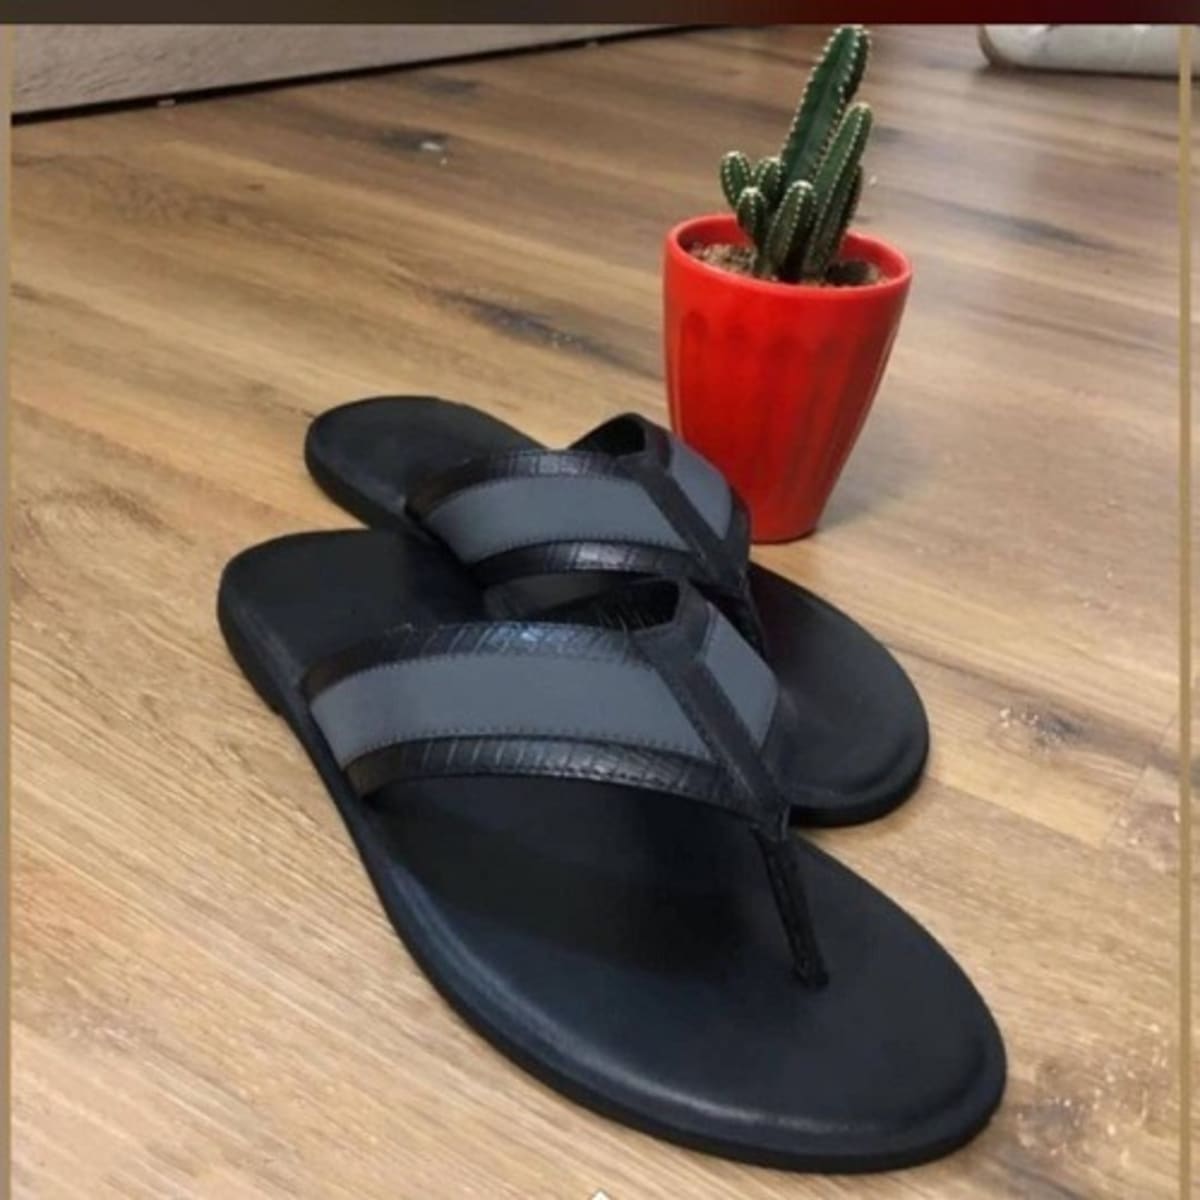 Share more than 70 pictures of palm slippers super hot - dedaotaonec